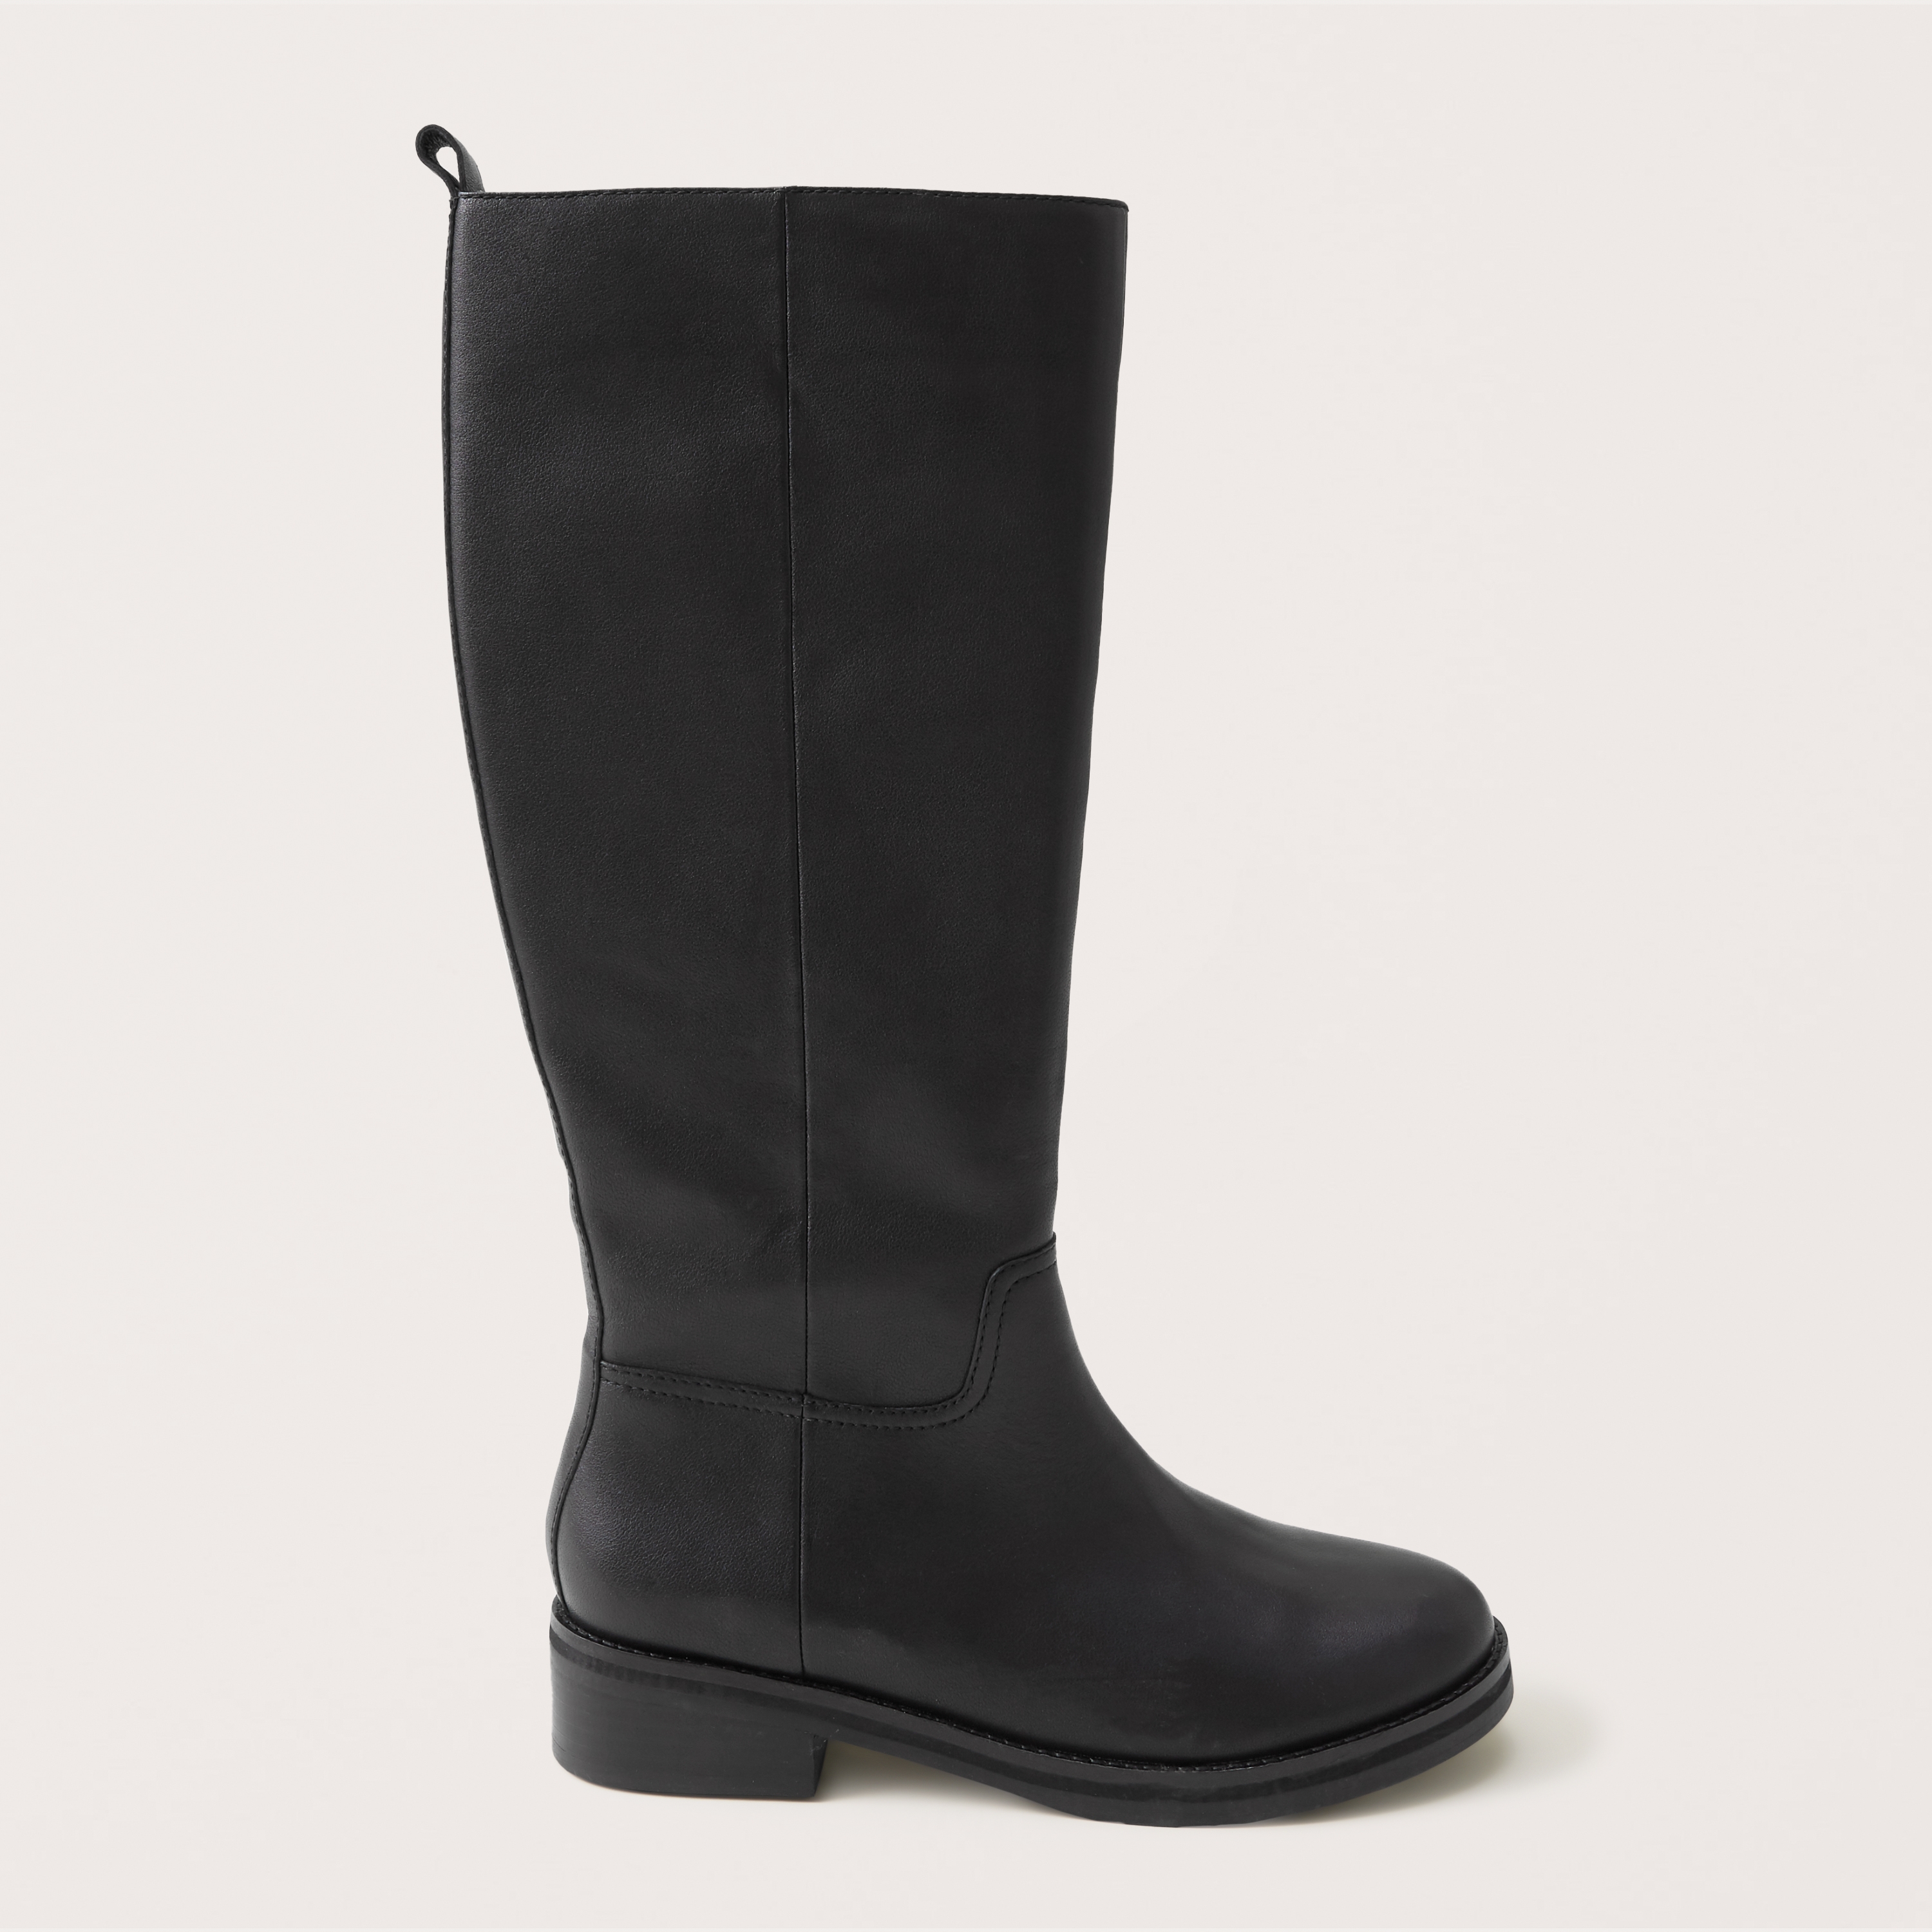 Agra Tall Leather Boots